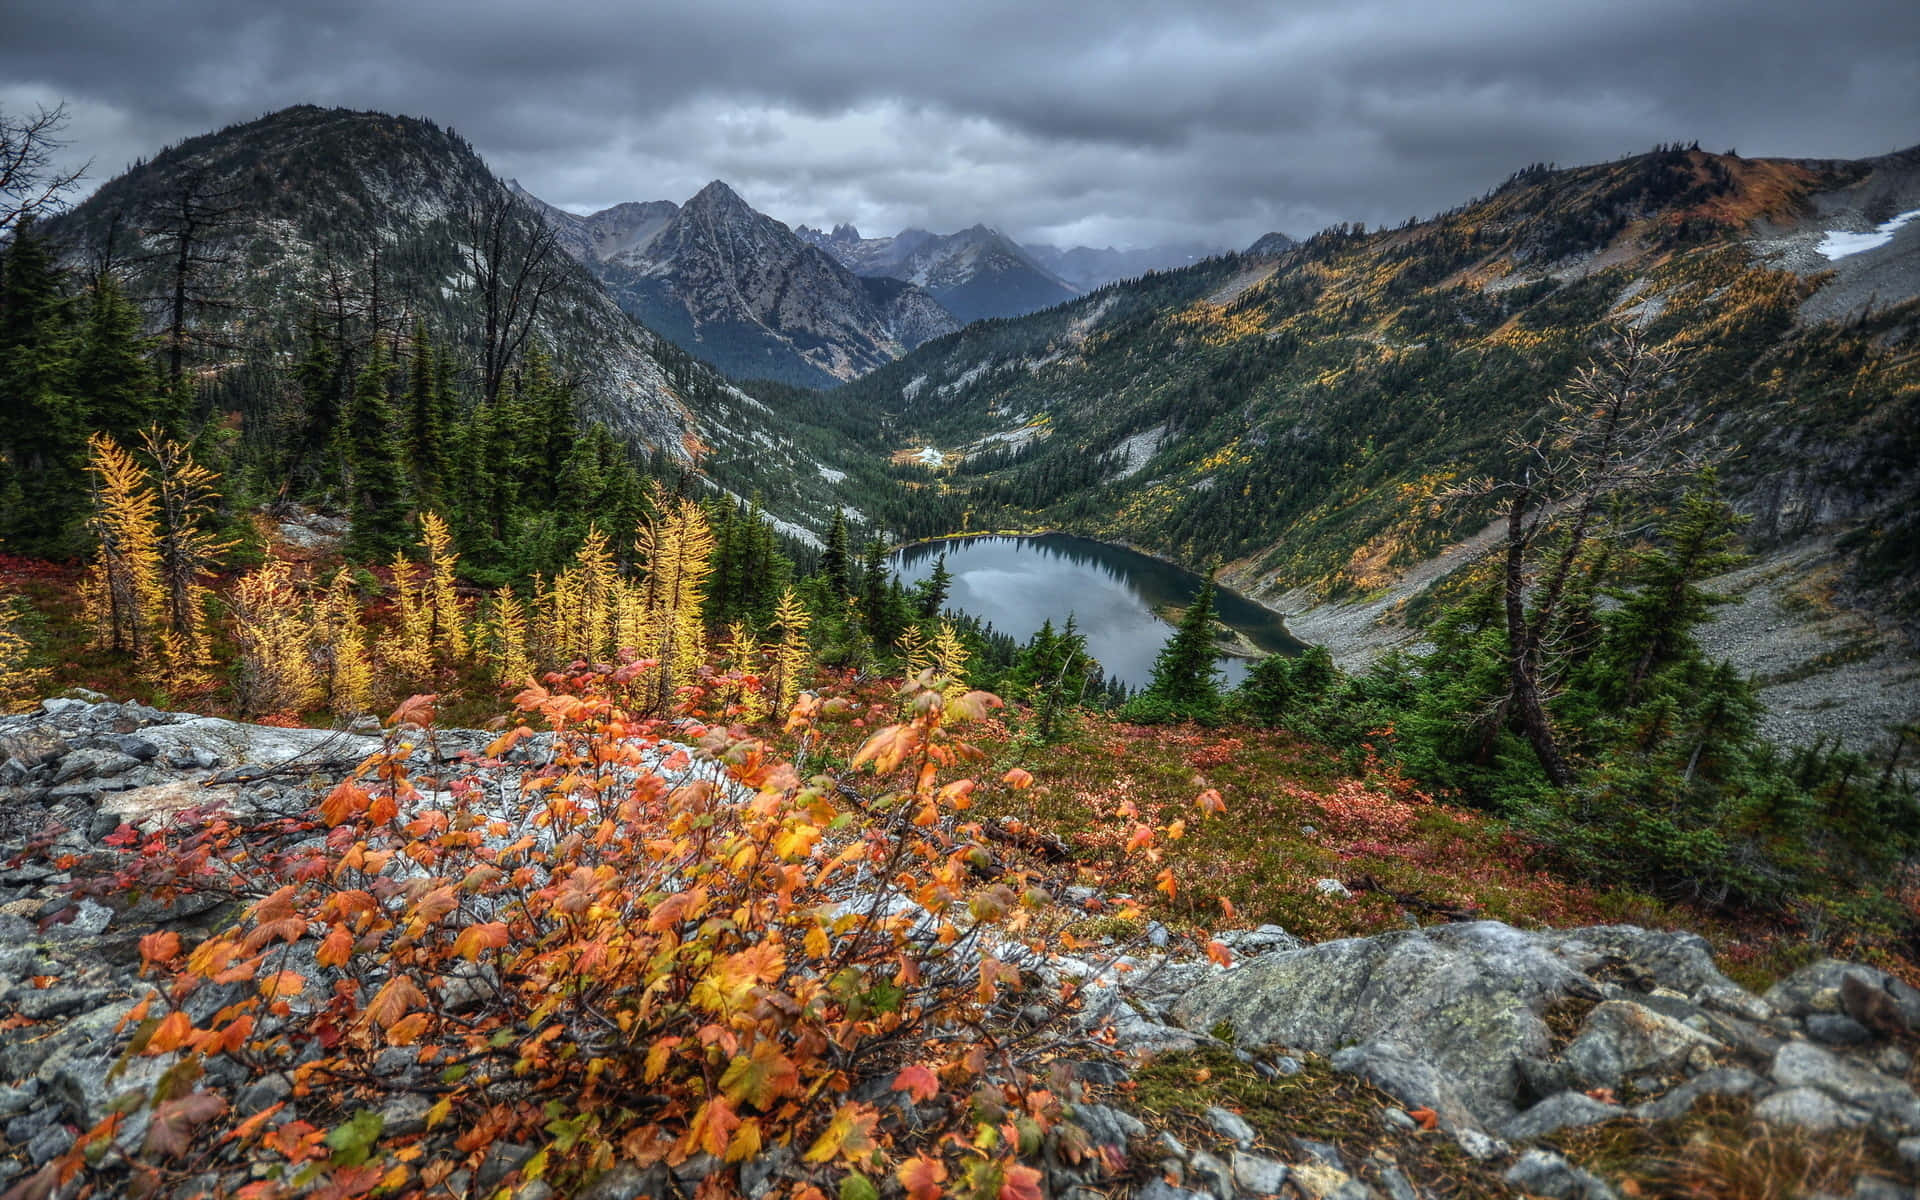 A picturesque scene of a fall mountain Wallpaper